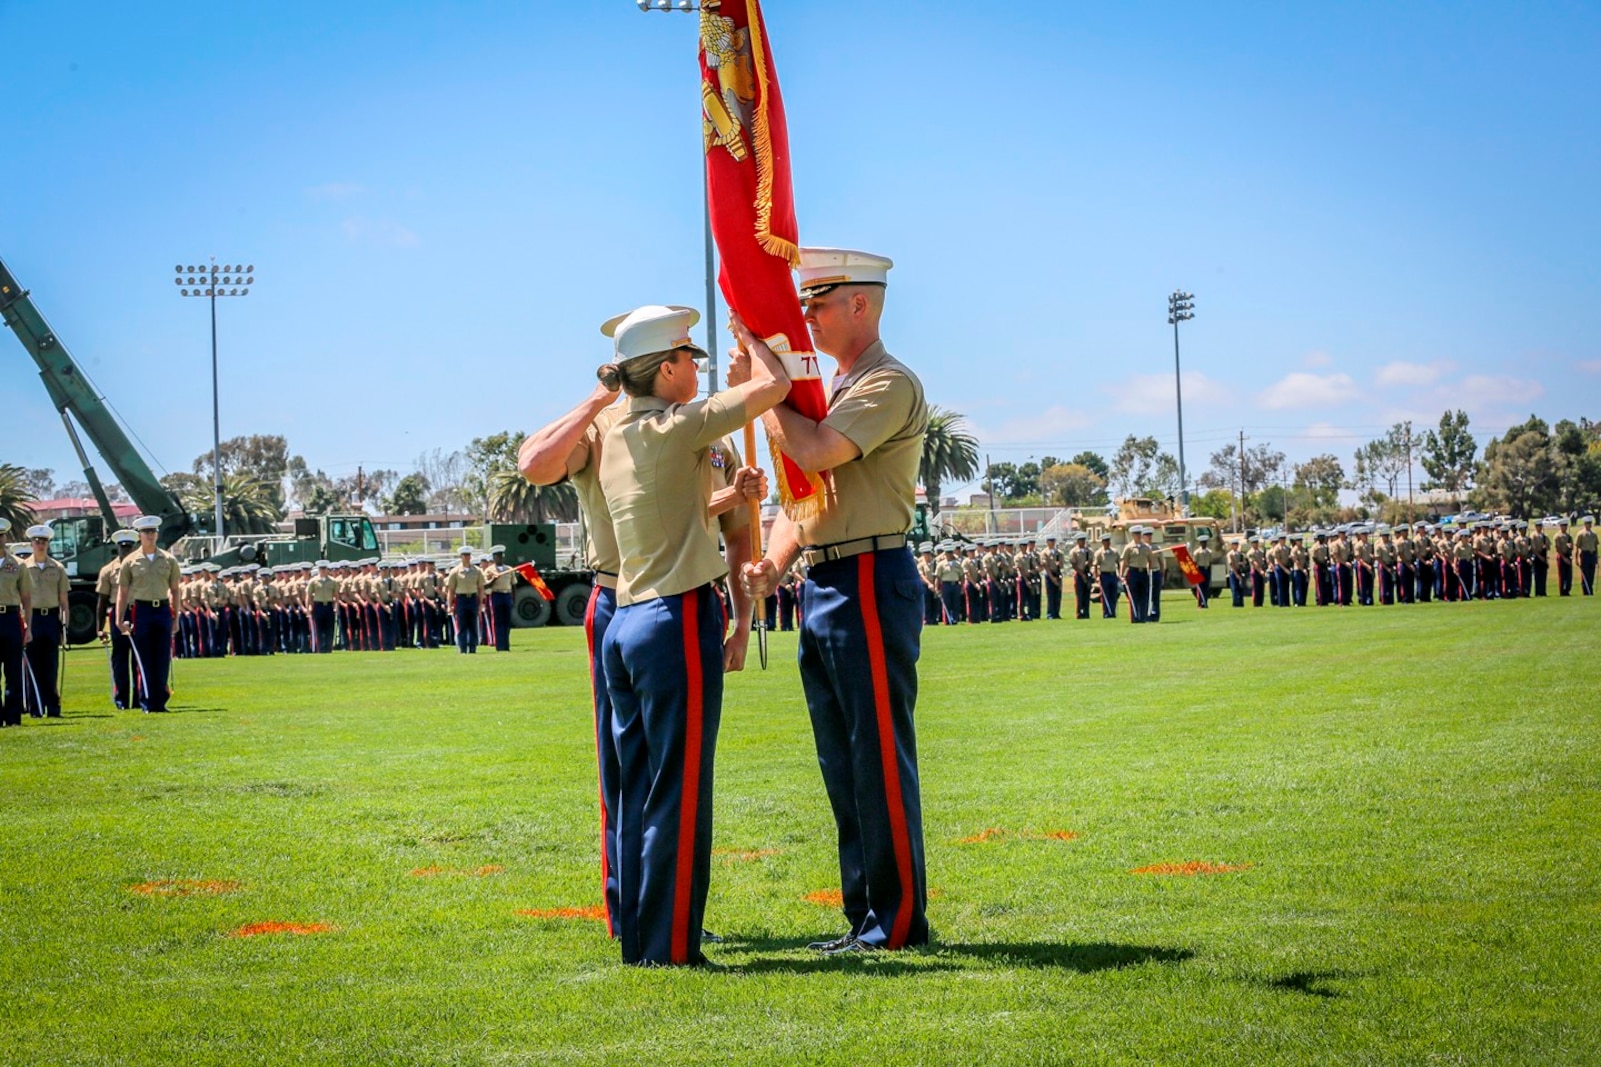 U.S. Marine Lt. Col. Jennifer A. Nash receives the unit colors from Lt. Col. Eric J. Penrod with 7th Engineer Support Battalion (ESB) 1st Marine Logistics Group. The change of command for 7th ESB, May 26th 2016, Camp Pendleton, Calif., represents a military tradition that represents the transfer of authority and responsibility of a unit from one commanding officer to another. (U.S. Marine Corps photo by LCpl. Salmineo Sherman Jr. 1st MLG Combat Camera/released)